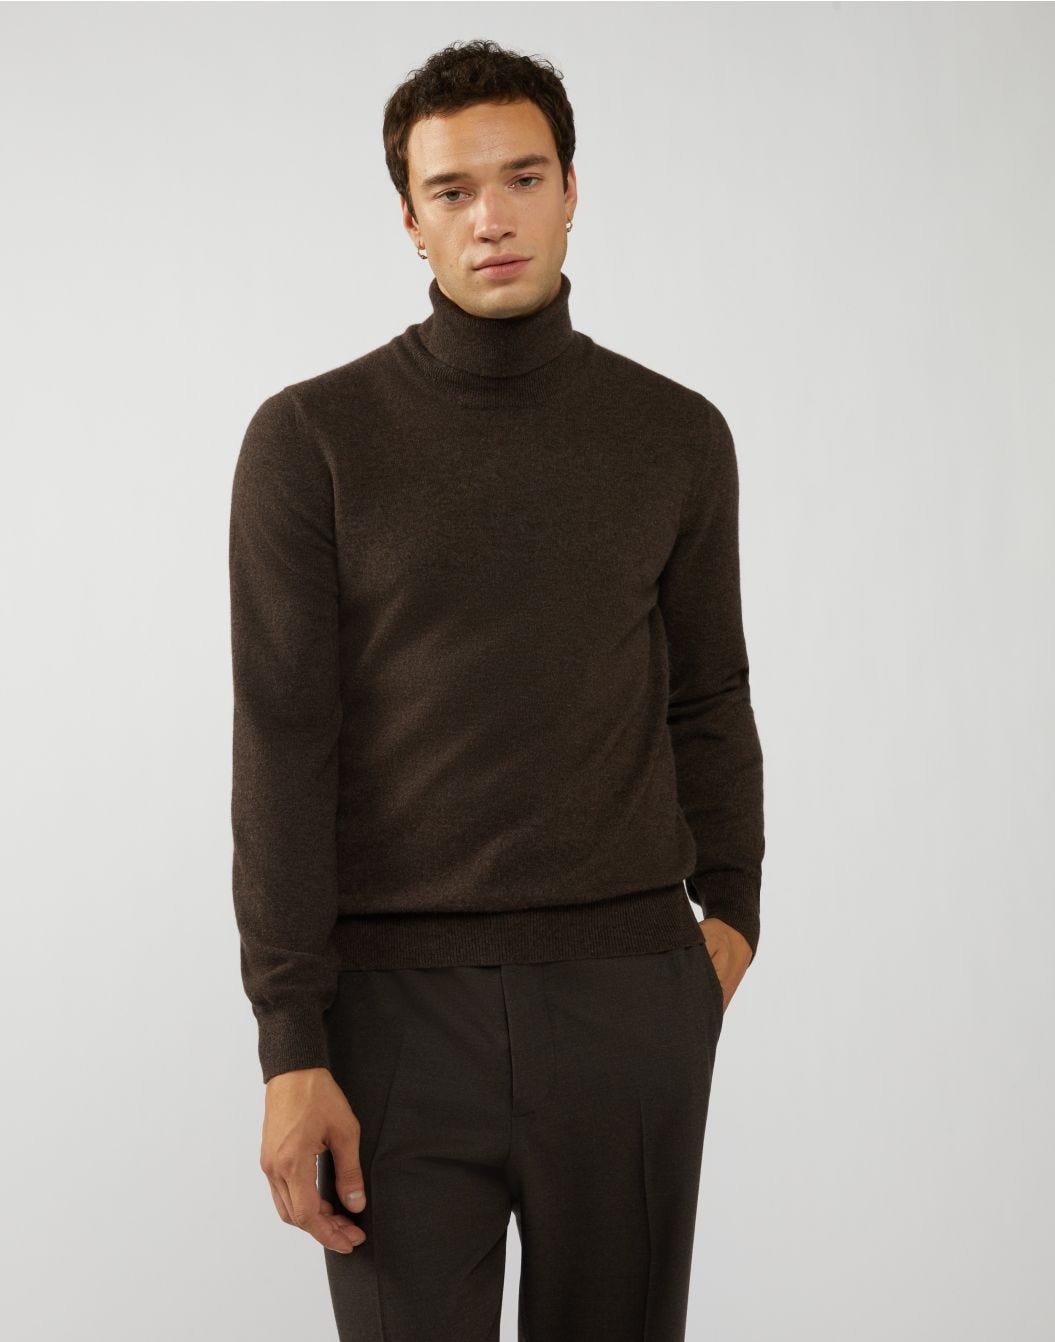 Turtleneck in brown yarn-dyed cashmere